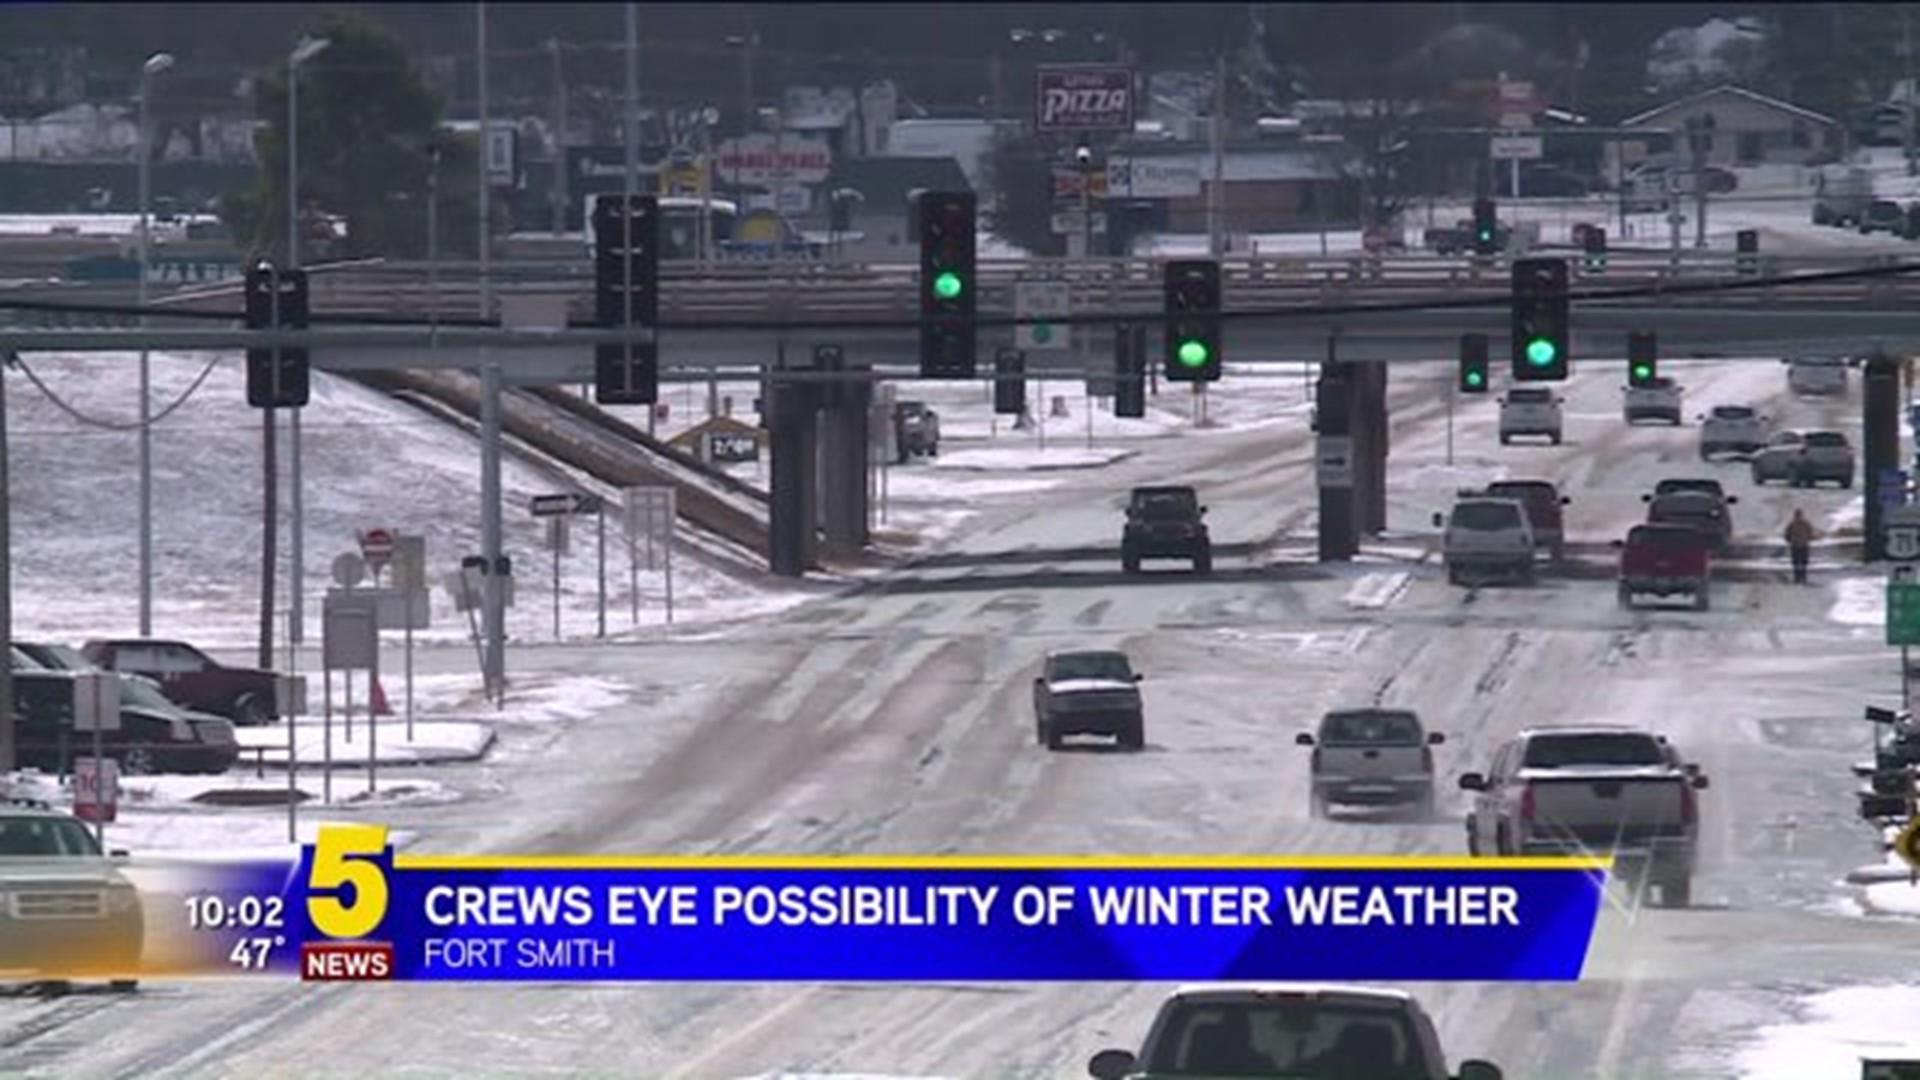 Crews Eye Possibility Of Winter Weather